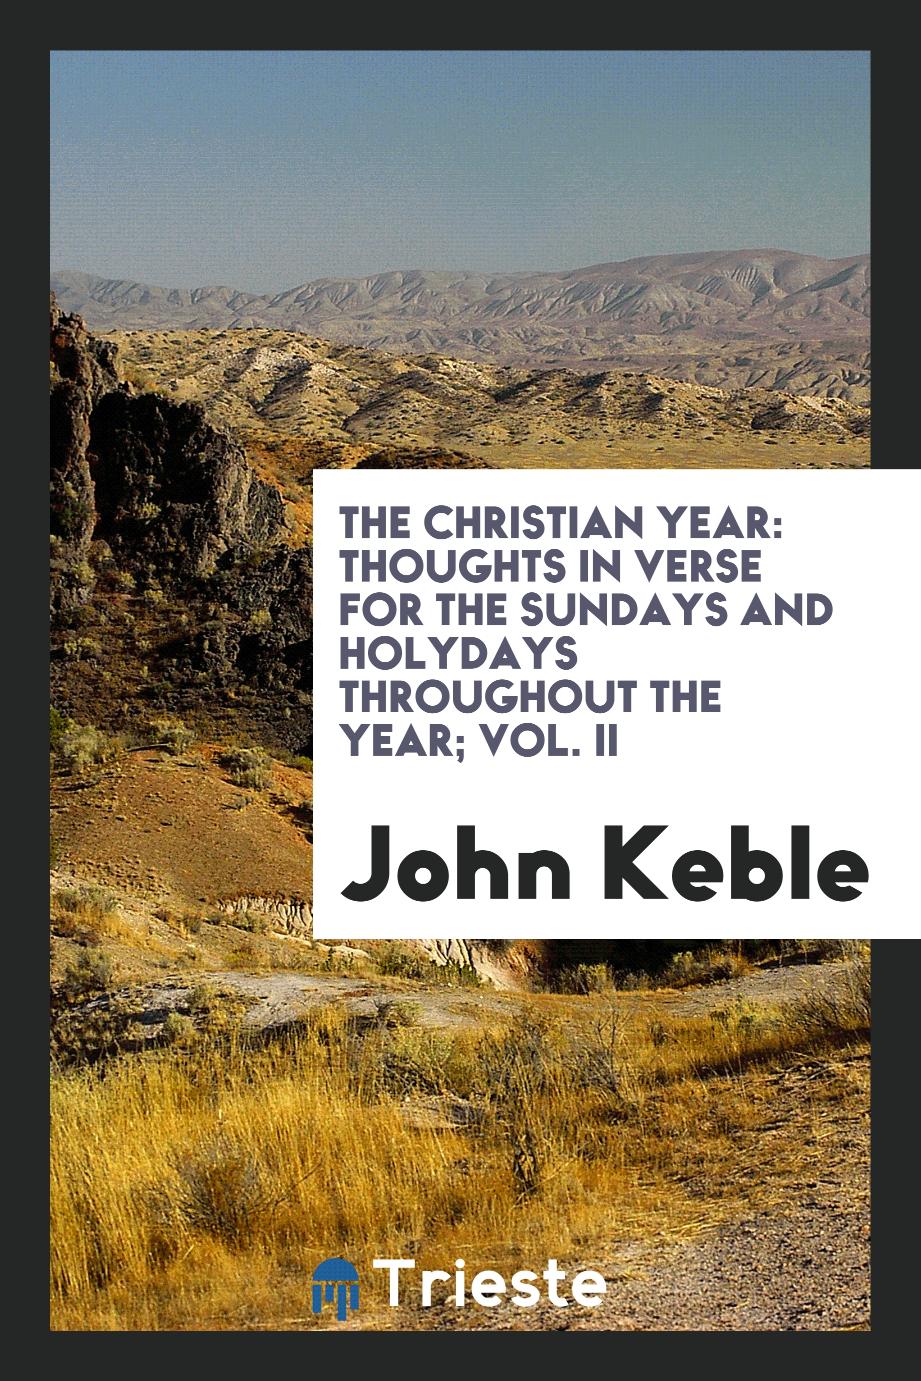 John Keble - The Christian year: Thoughts in verse for the Sundays and Holydays throughout the year; Vol. II